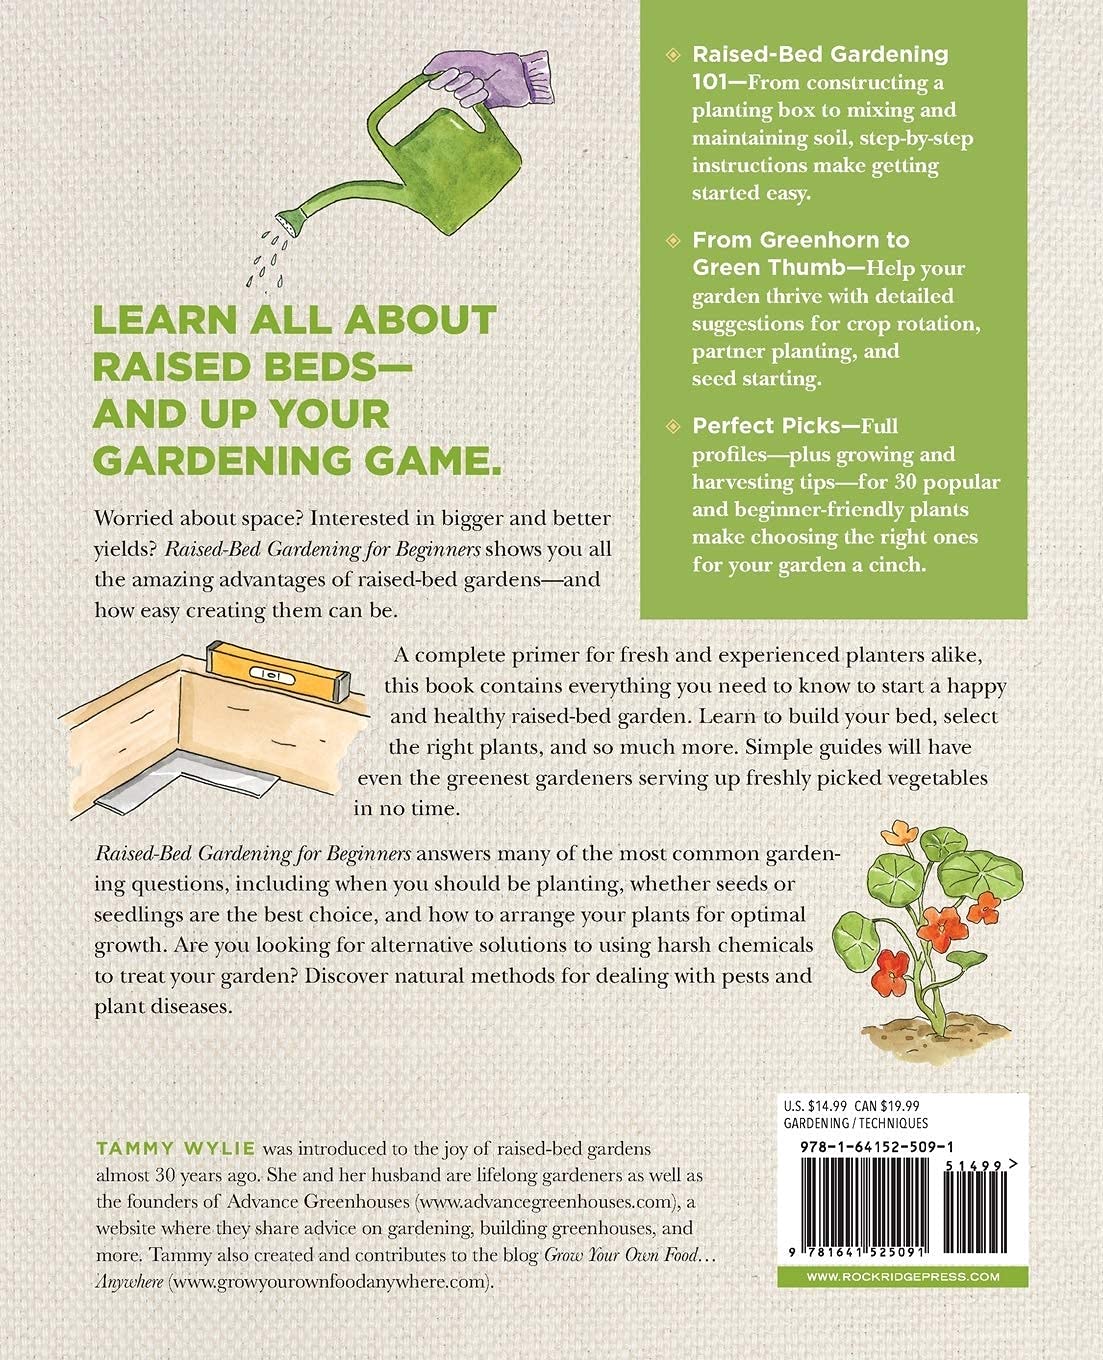 Raised Bed Gardening for Beginners: Everything You Need to Know to Start and Sustain a Thriving Garden (Spiral Bound)